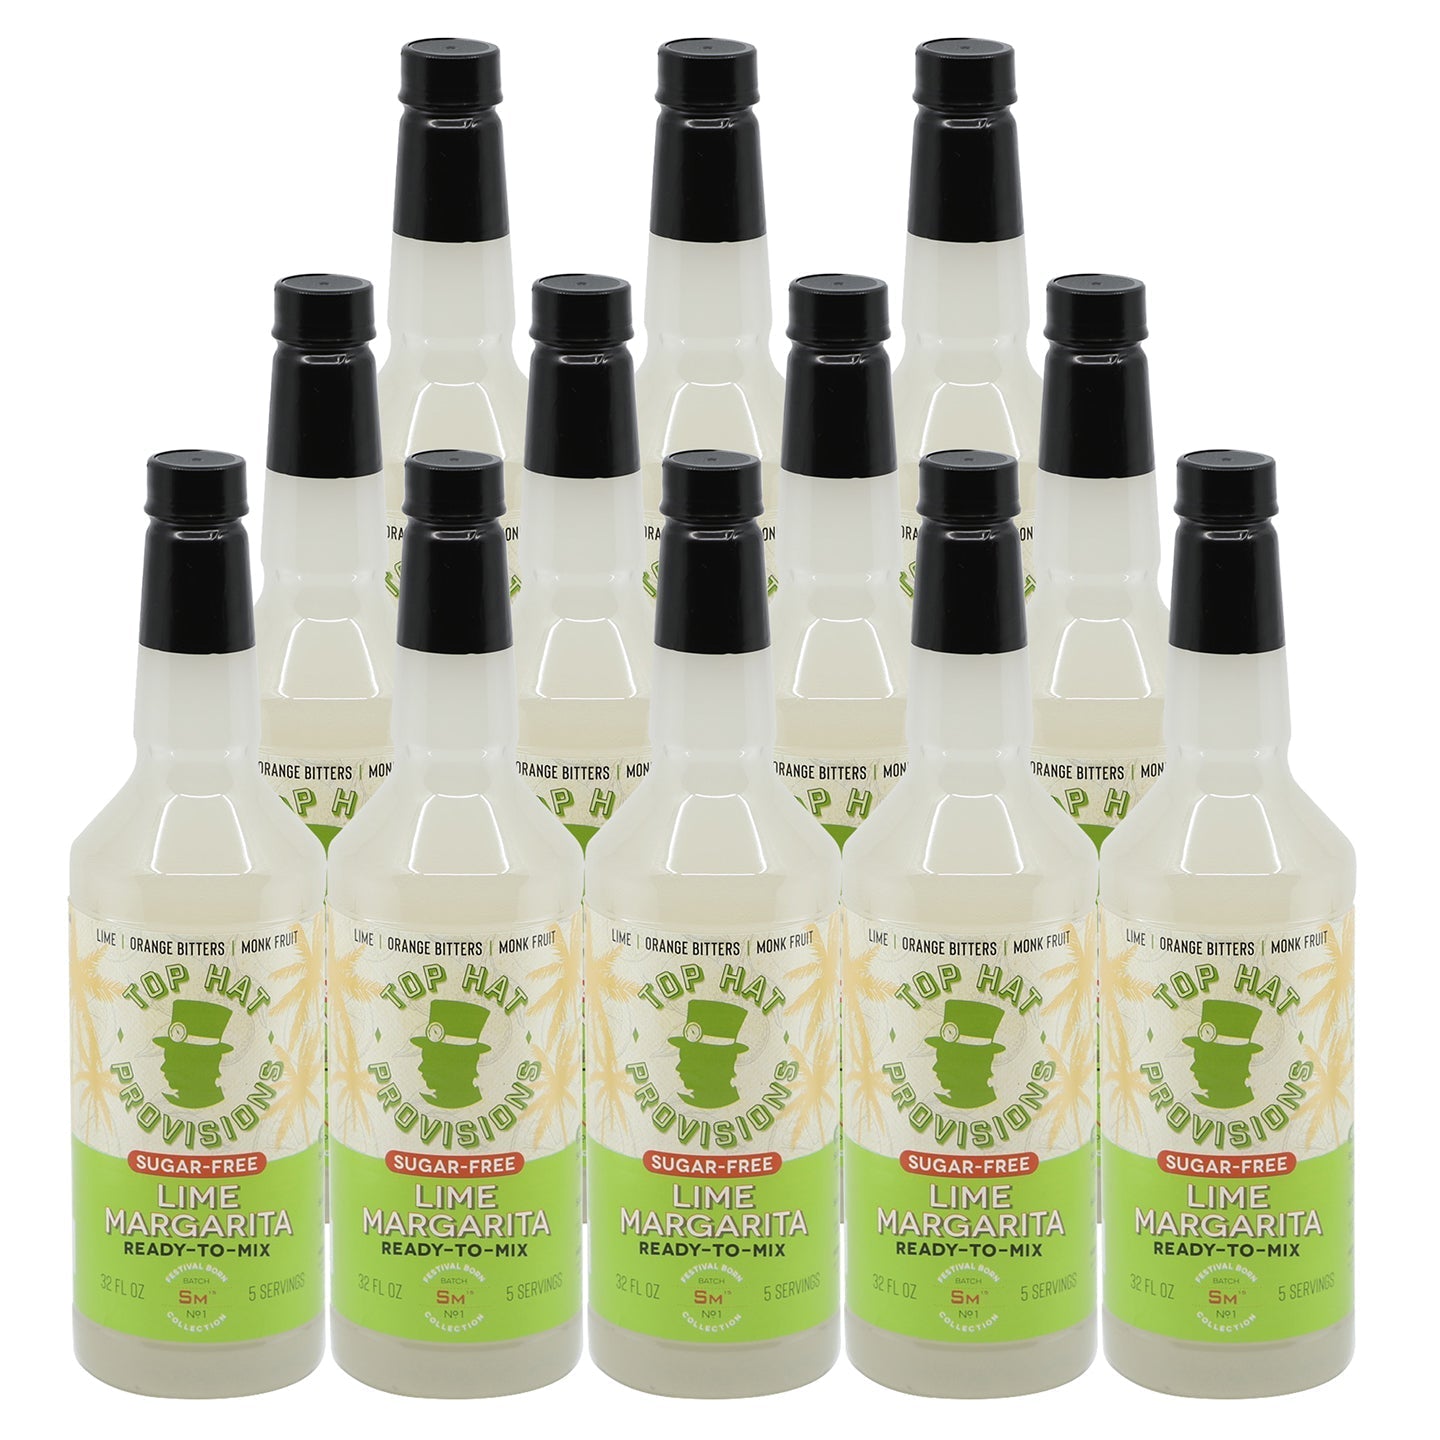 Top Hat Keto Sugar Free Margarita Lime Mix (made with Monk Fruit) - 12 pack of 32oz Bottles (Naturally sweetened with keto friendly / carb free / zero sugar Monk Fruit) - Groove Rabbit